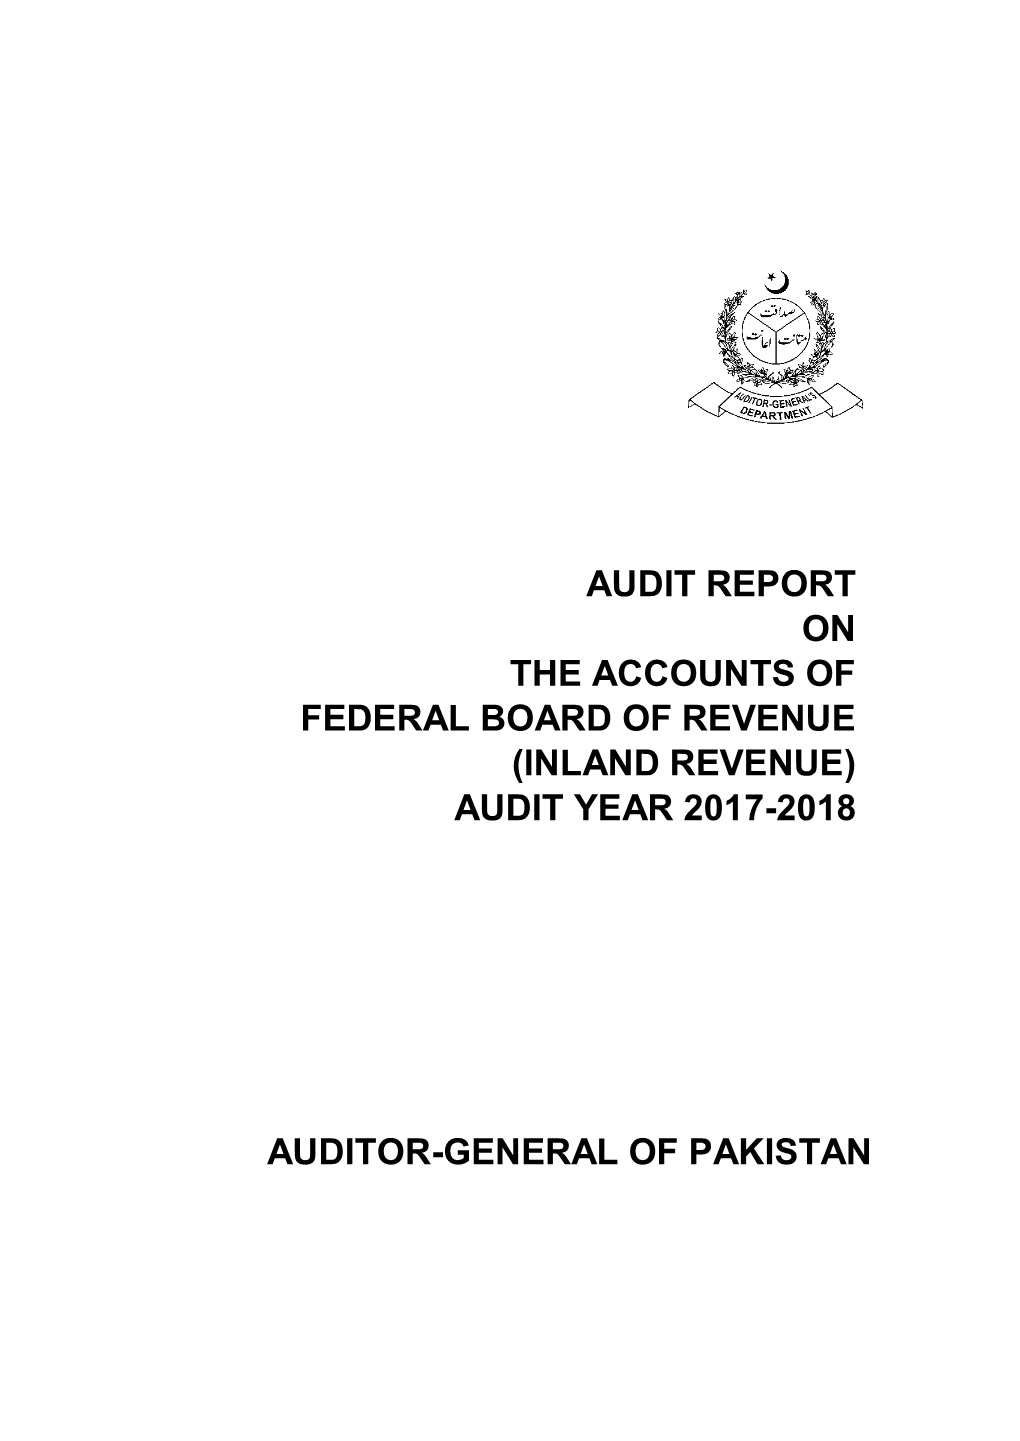 Audit Report on the Accounts of Federal Board of Revenue (Inland Revenue) Audit Year 2017-2018